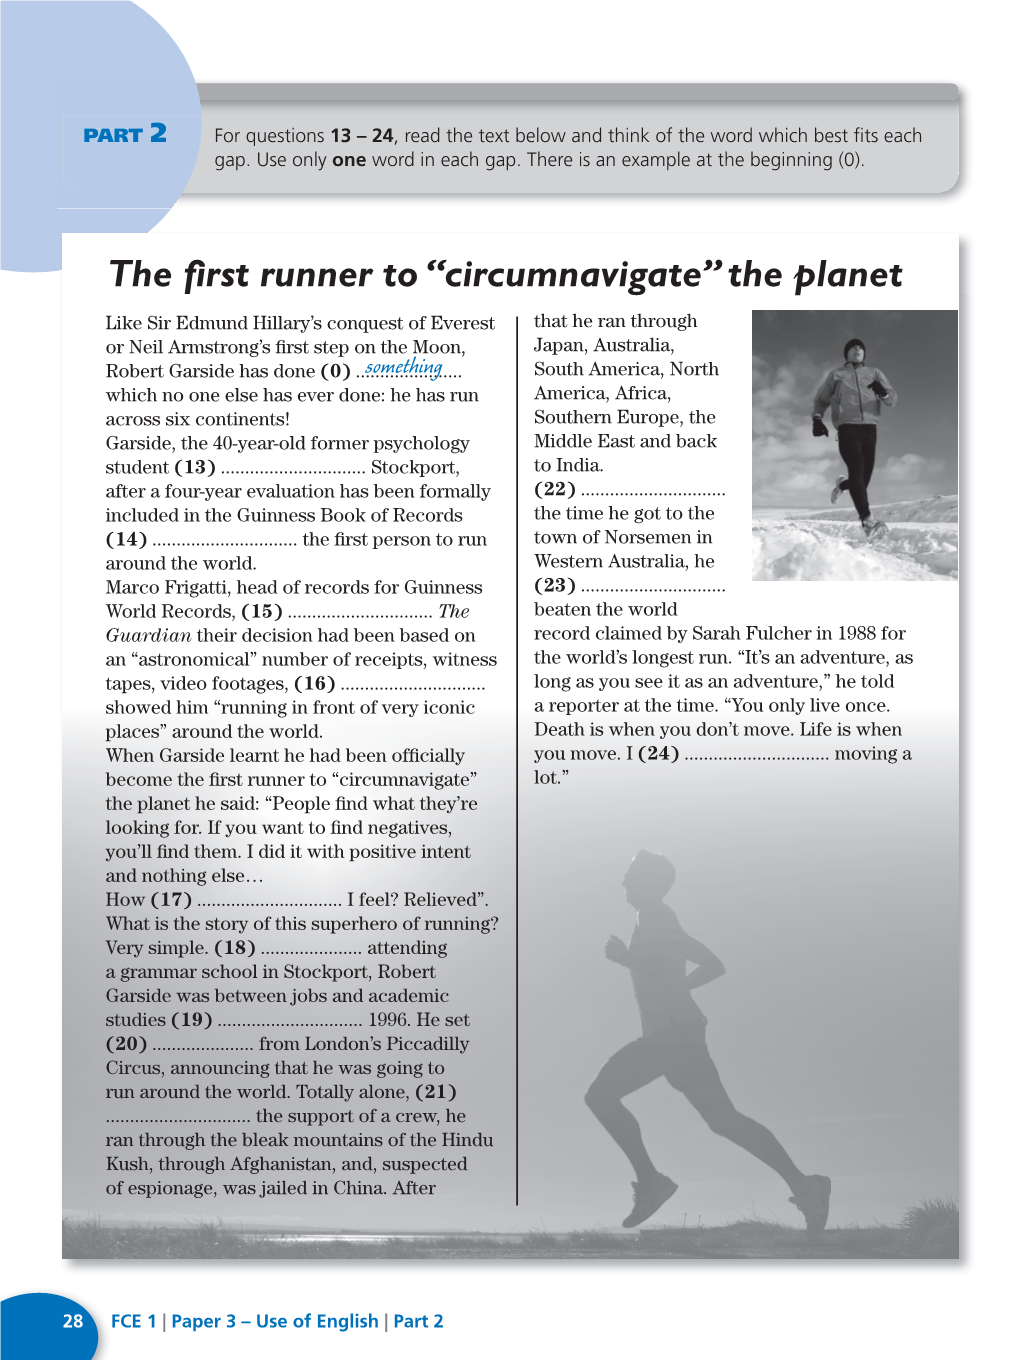 The First Runner to “Circumnavigate” the Planet